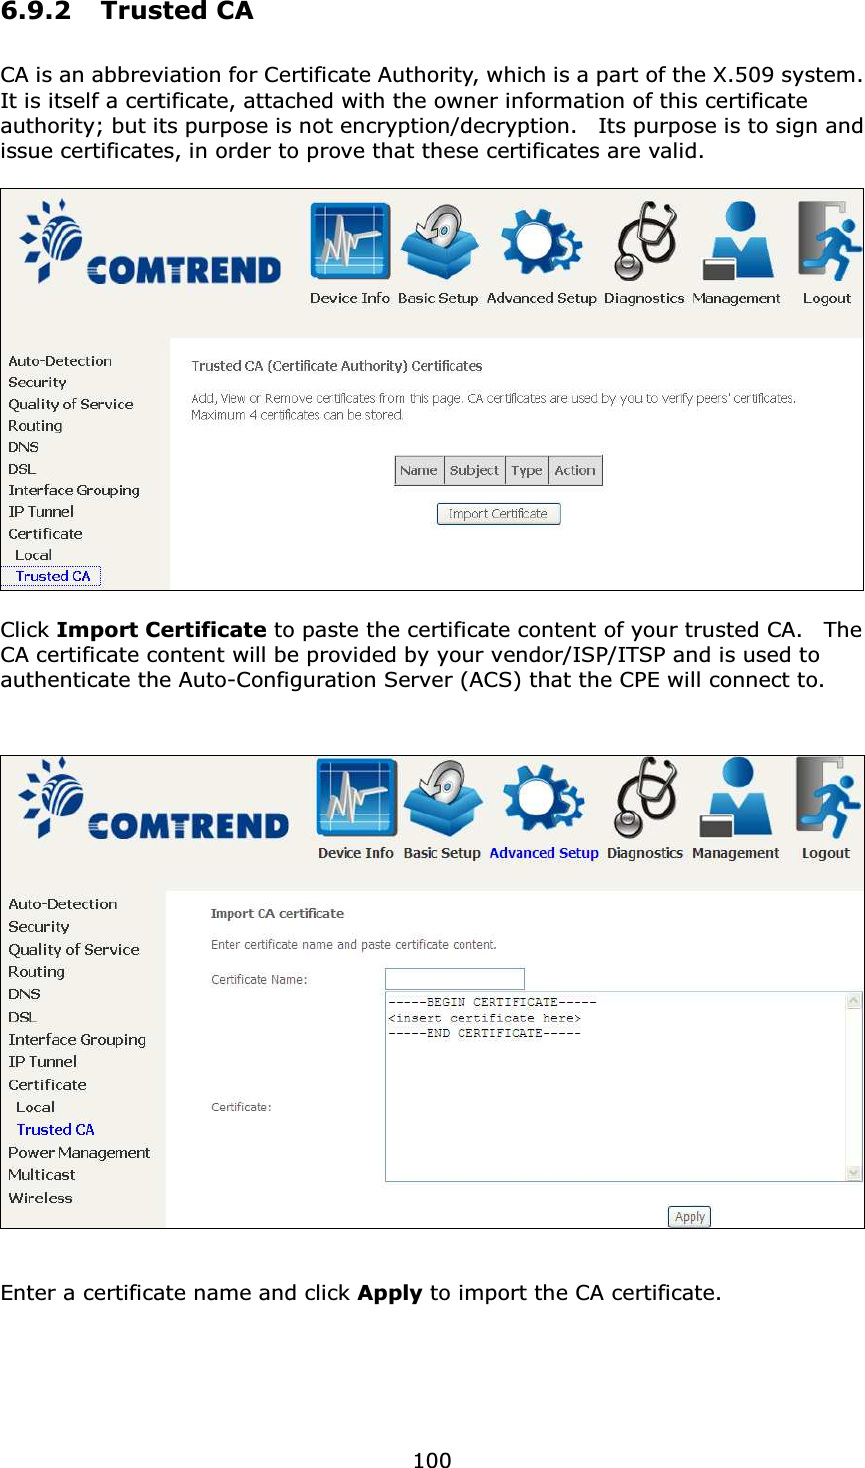  1006.9.2 Trusted CA  CA is an abbreviation for Certificate Authority, which is a part of the X.509 system.   It is itself a certificate, attached with the owner information of this certificate authority; but its purpose is not encryption/decryption.    Its purpose is to sign and issue certificates, in order to prove that these certificates are valid.    Click Import Certificate to paste the certificate content of your trusted CA.    The CA certificate content will be provided by your vendor/ISP/ITSP and is used to authenticate the Auto-Configuration Server (ACS) that the CPE will connect to.      Enter a certificate name and click Apply to import the CA certificate. 